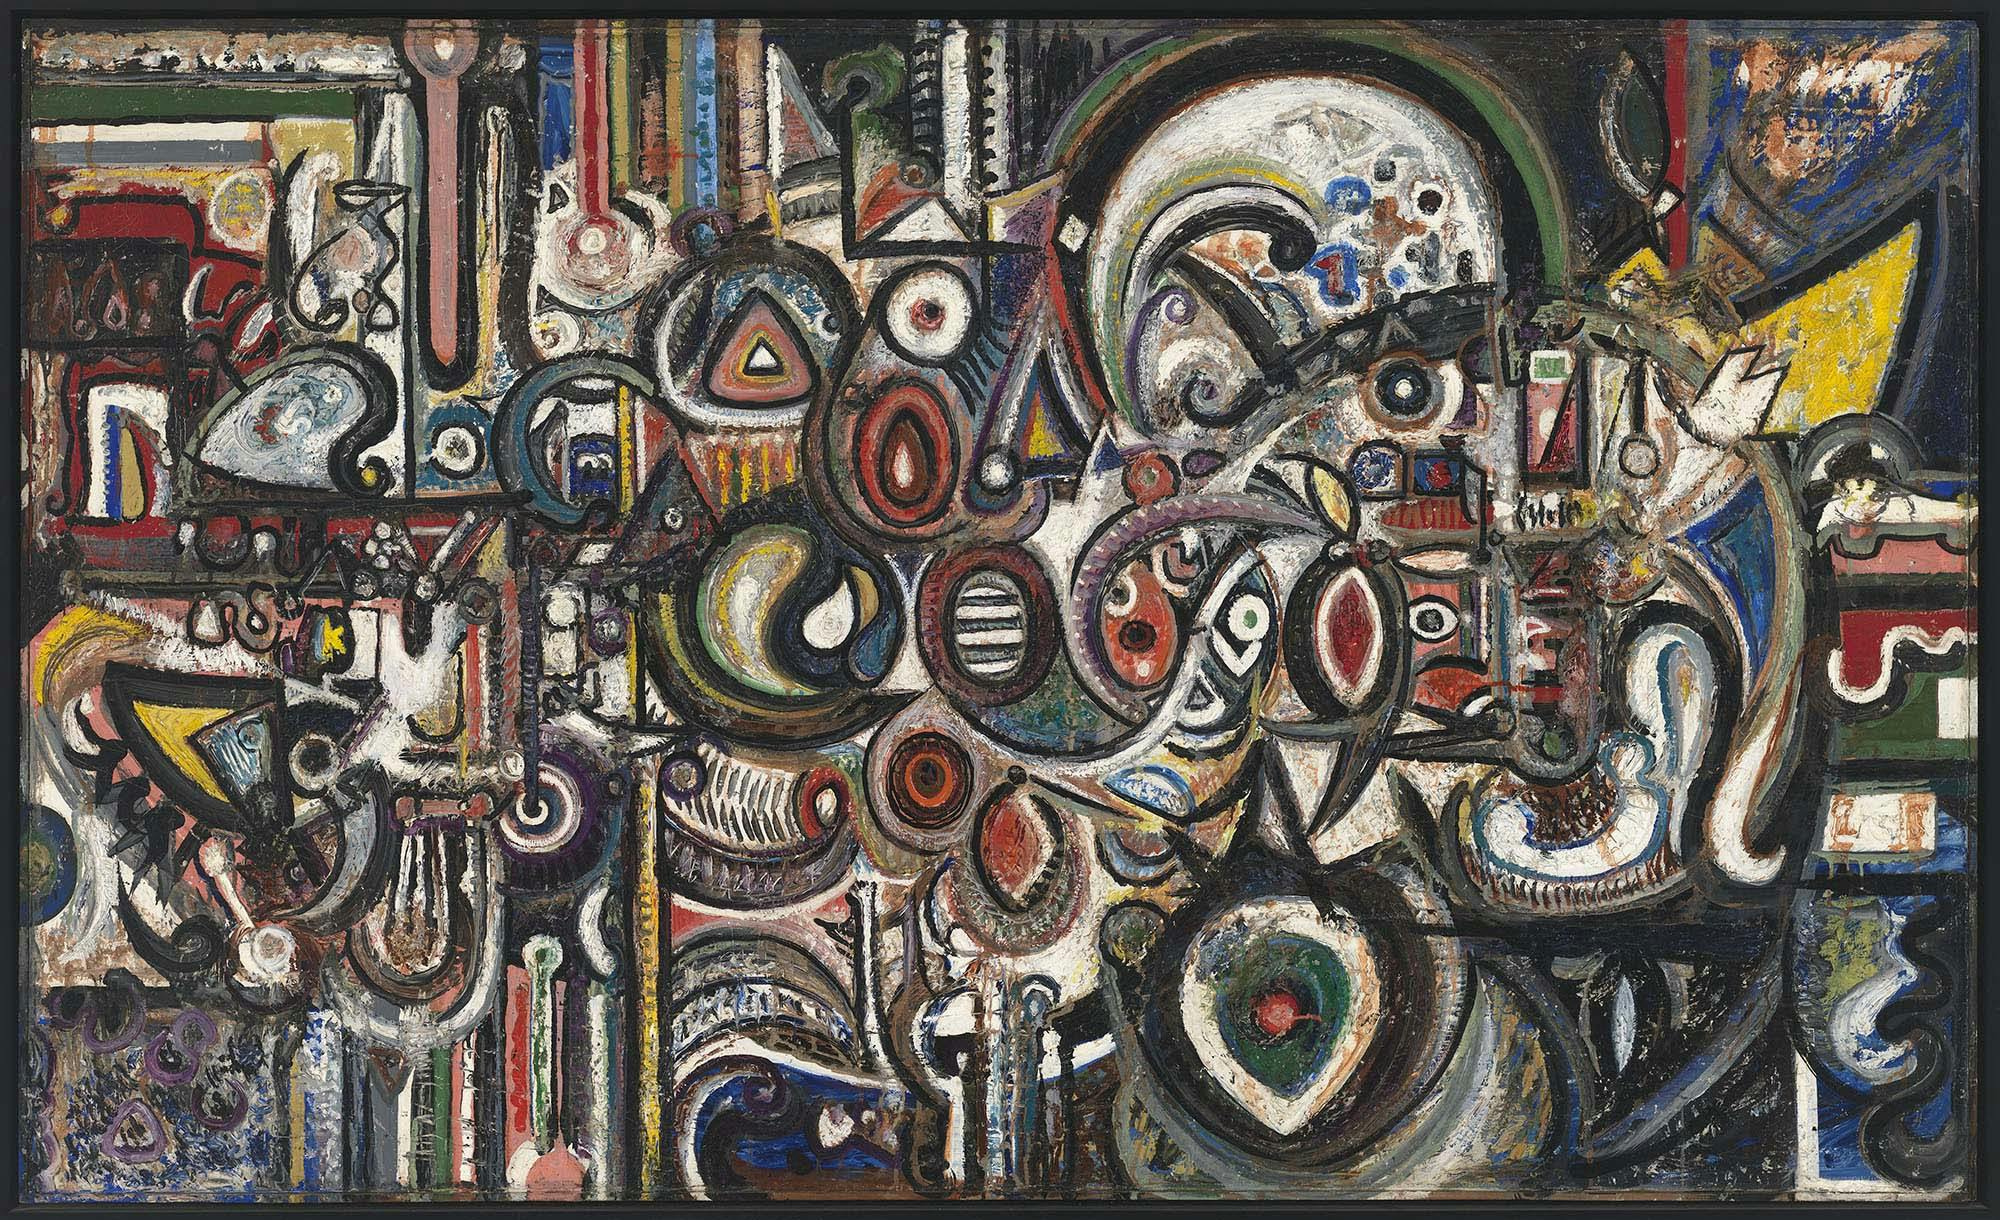 Within the Room
1942
Oil on canvas, with wood frame
36 x 60 in. (91.4 x 152.4 cm)
Whitney Museum of American Art, New York, 50th Anniversary gift of the artist (2014.99)
 – The Richard Pousette-Dart Foundation